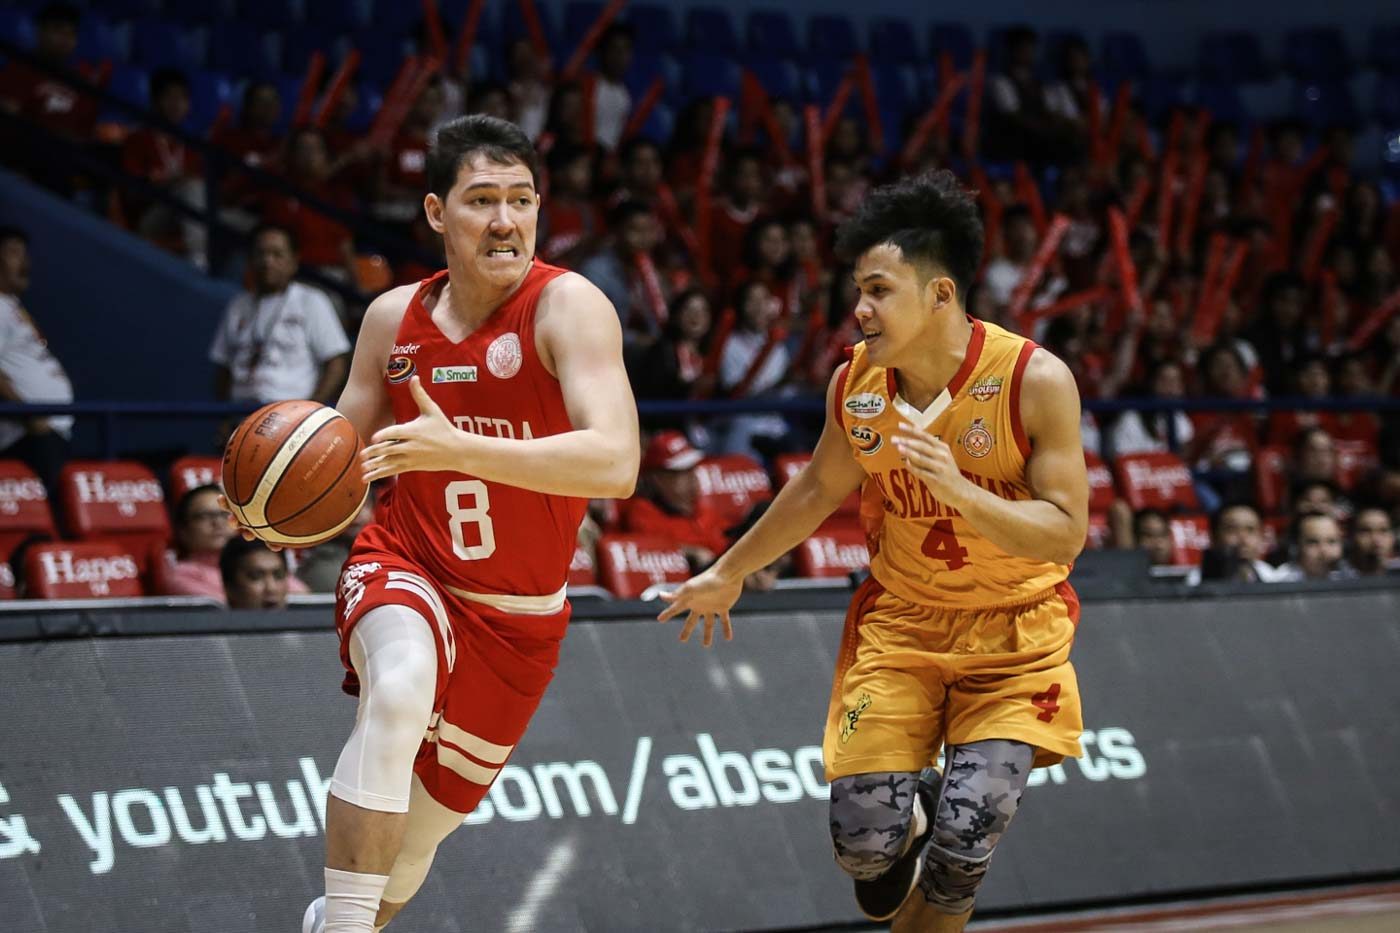 San Beda ends NCAA elimination round on a high note